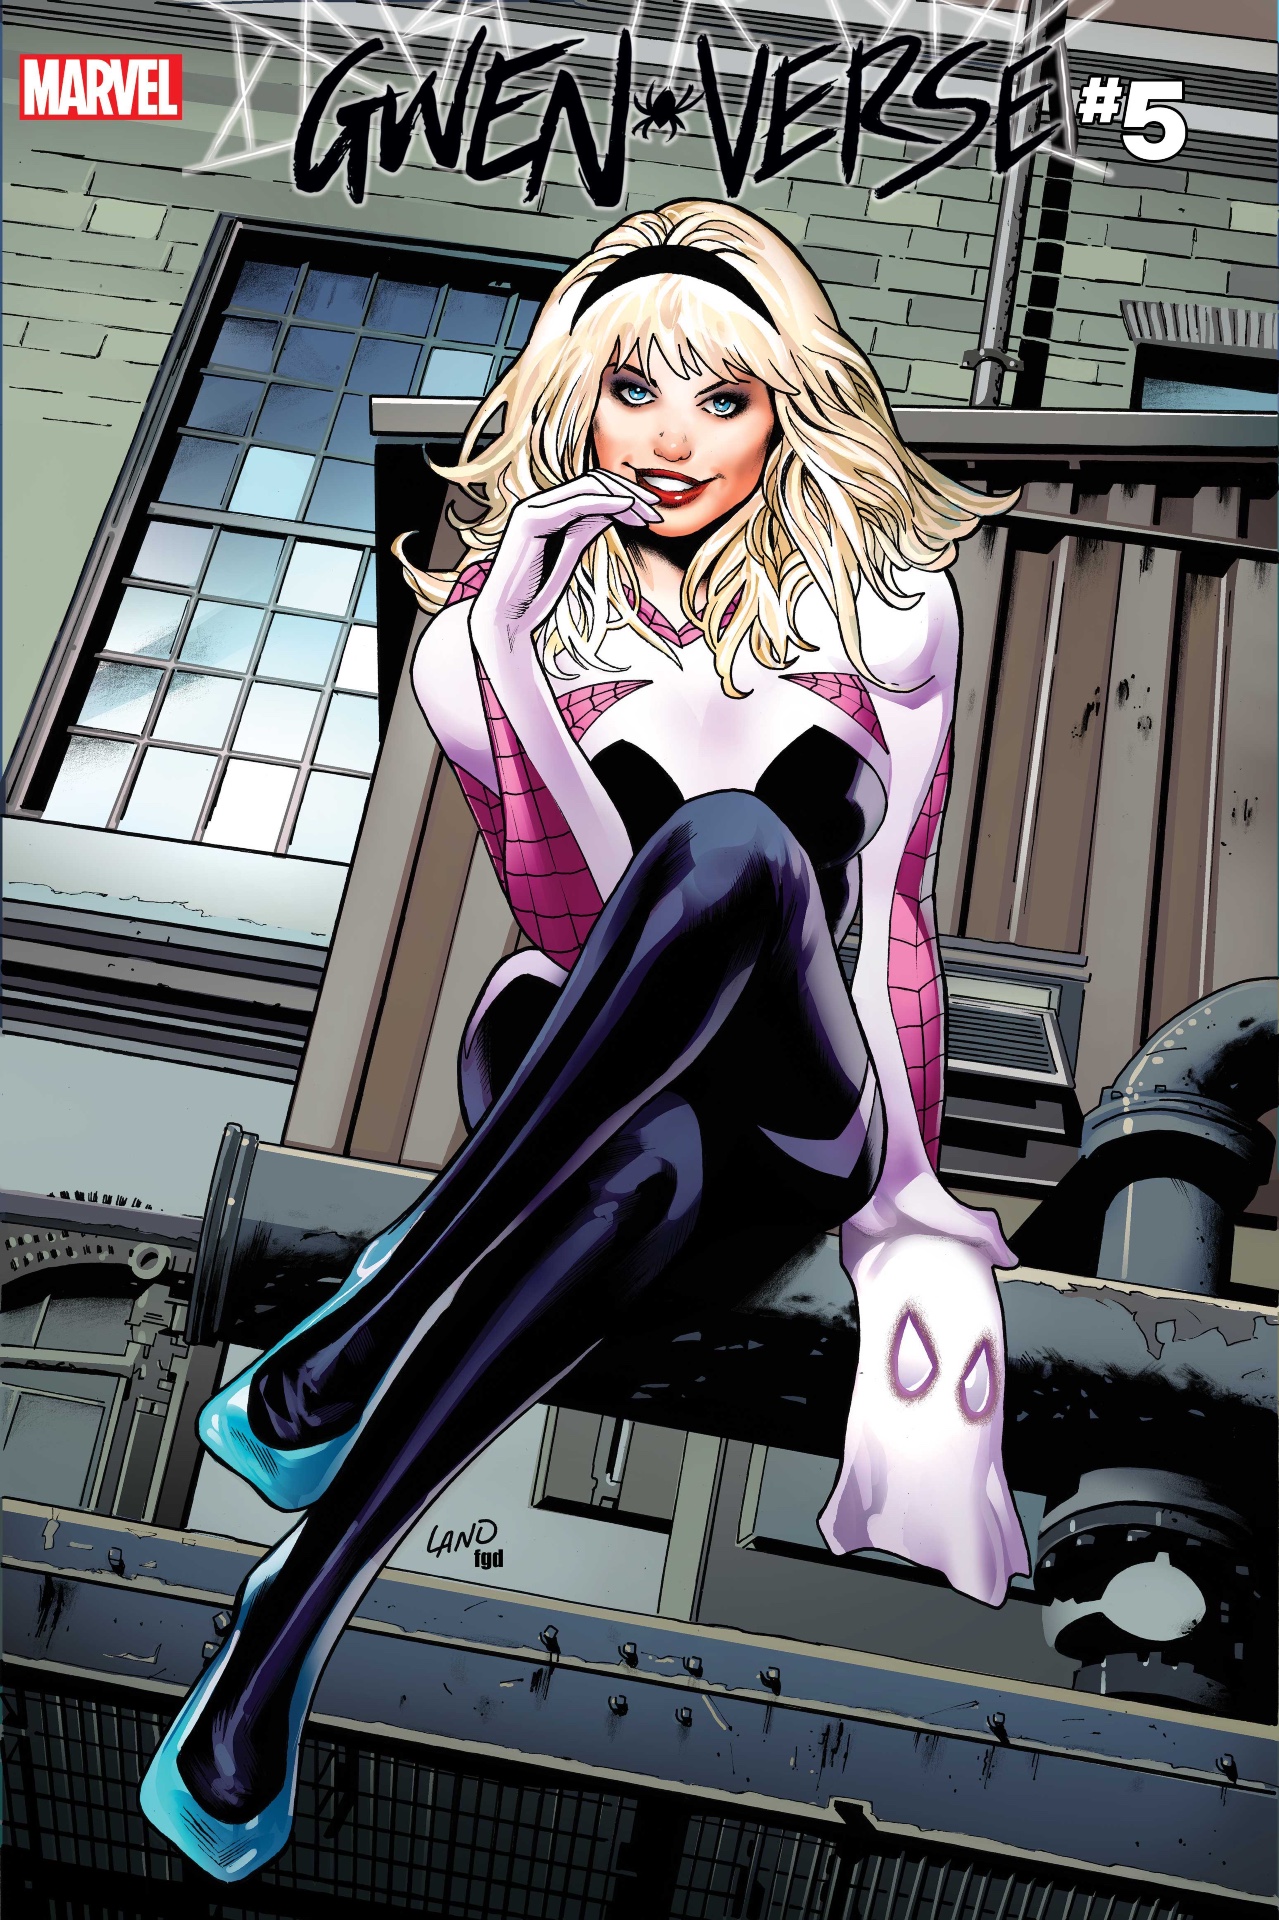 Gwen-Verse variant cover by Greg Land